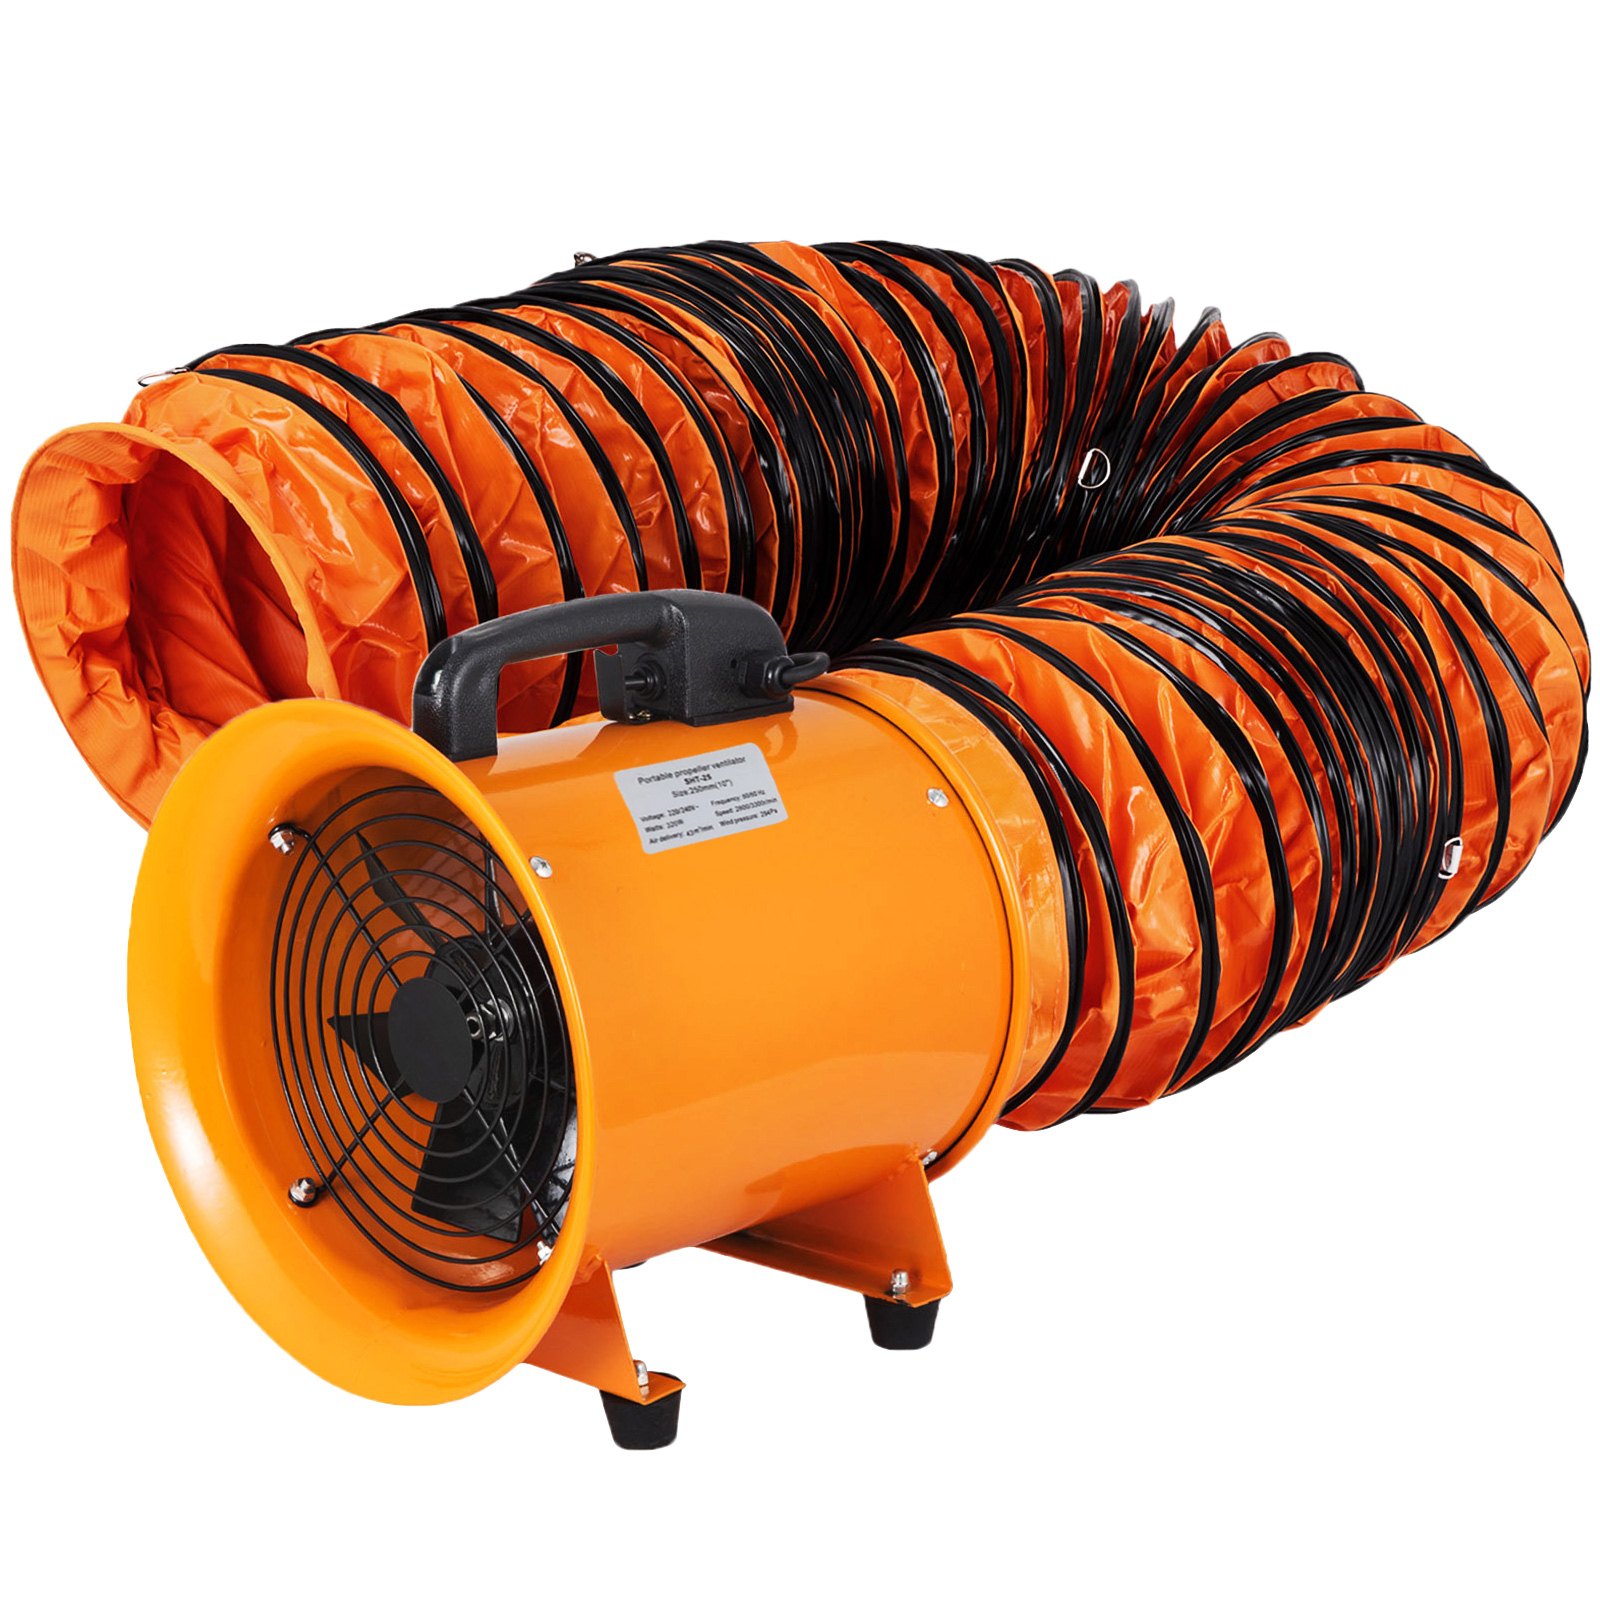 Dust Fume Extractor 10inch 250mm Ventilation Fan Industrial Blower + 10m PVC Ducting от Vevor Many GEOs